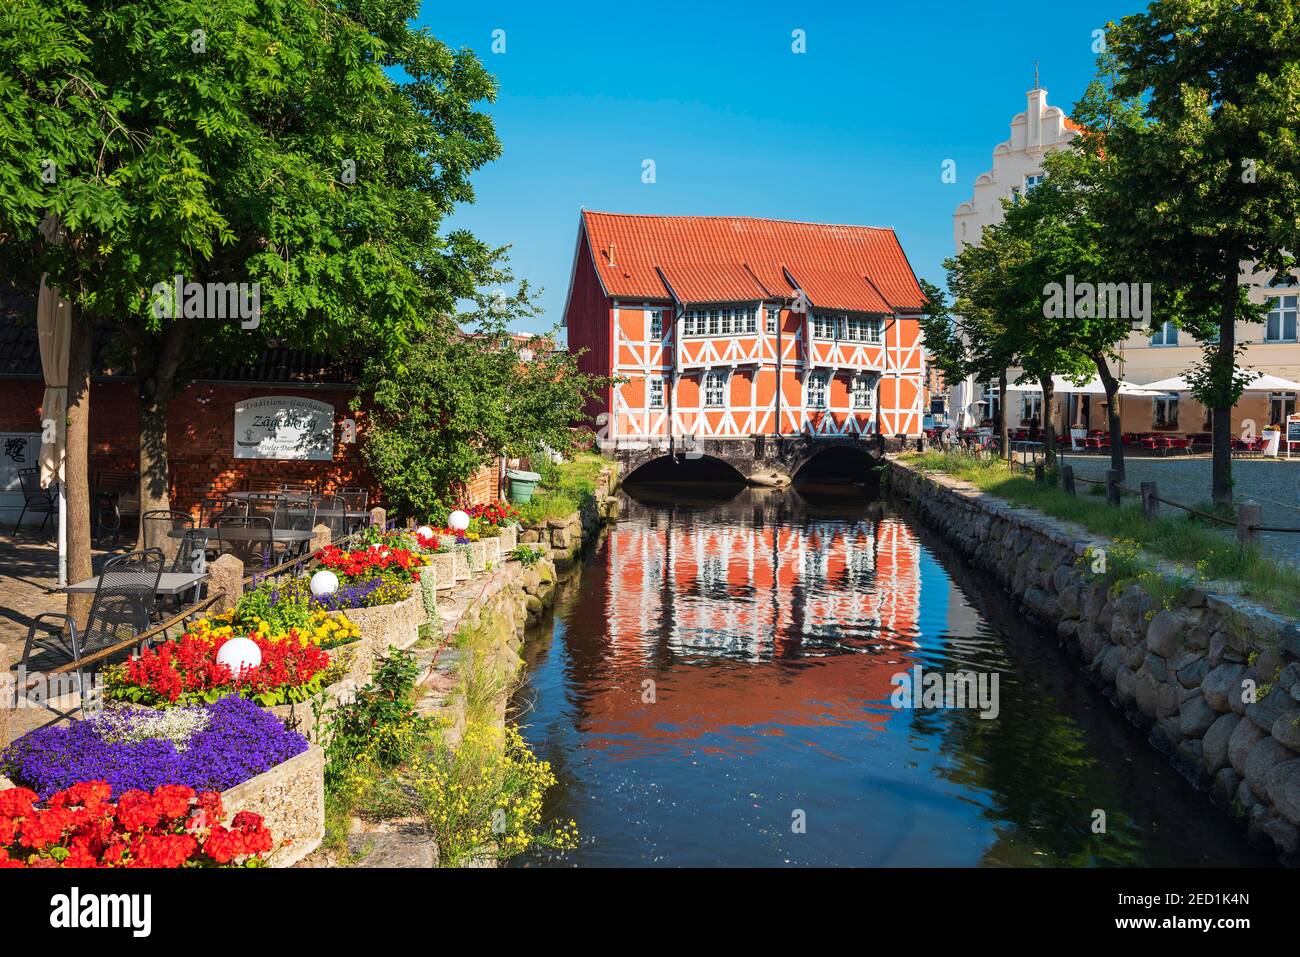 Half-timbered house vault over the watercourse Grube, Hanseatic City of Wismar, Mecklenburg-Western Pomerania, Germany Stock Photo